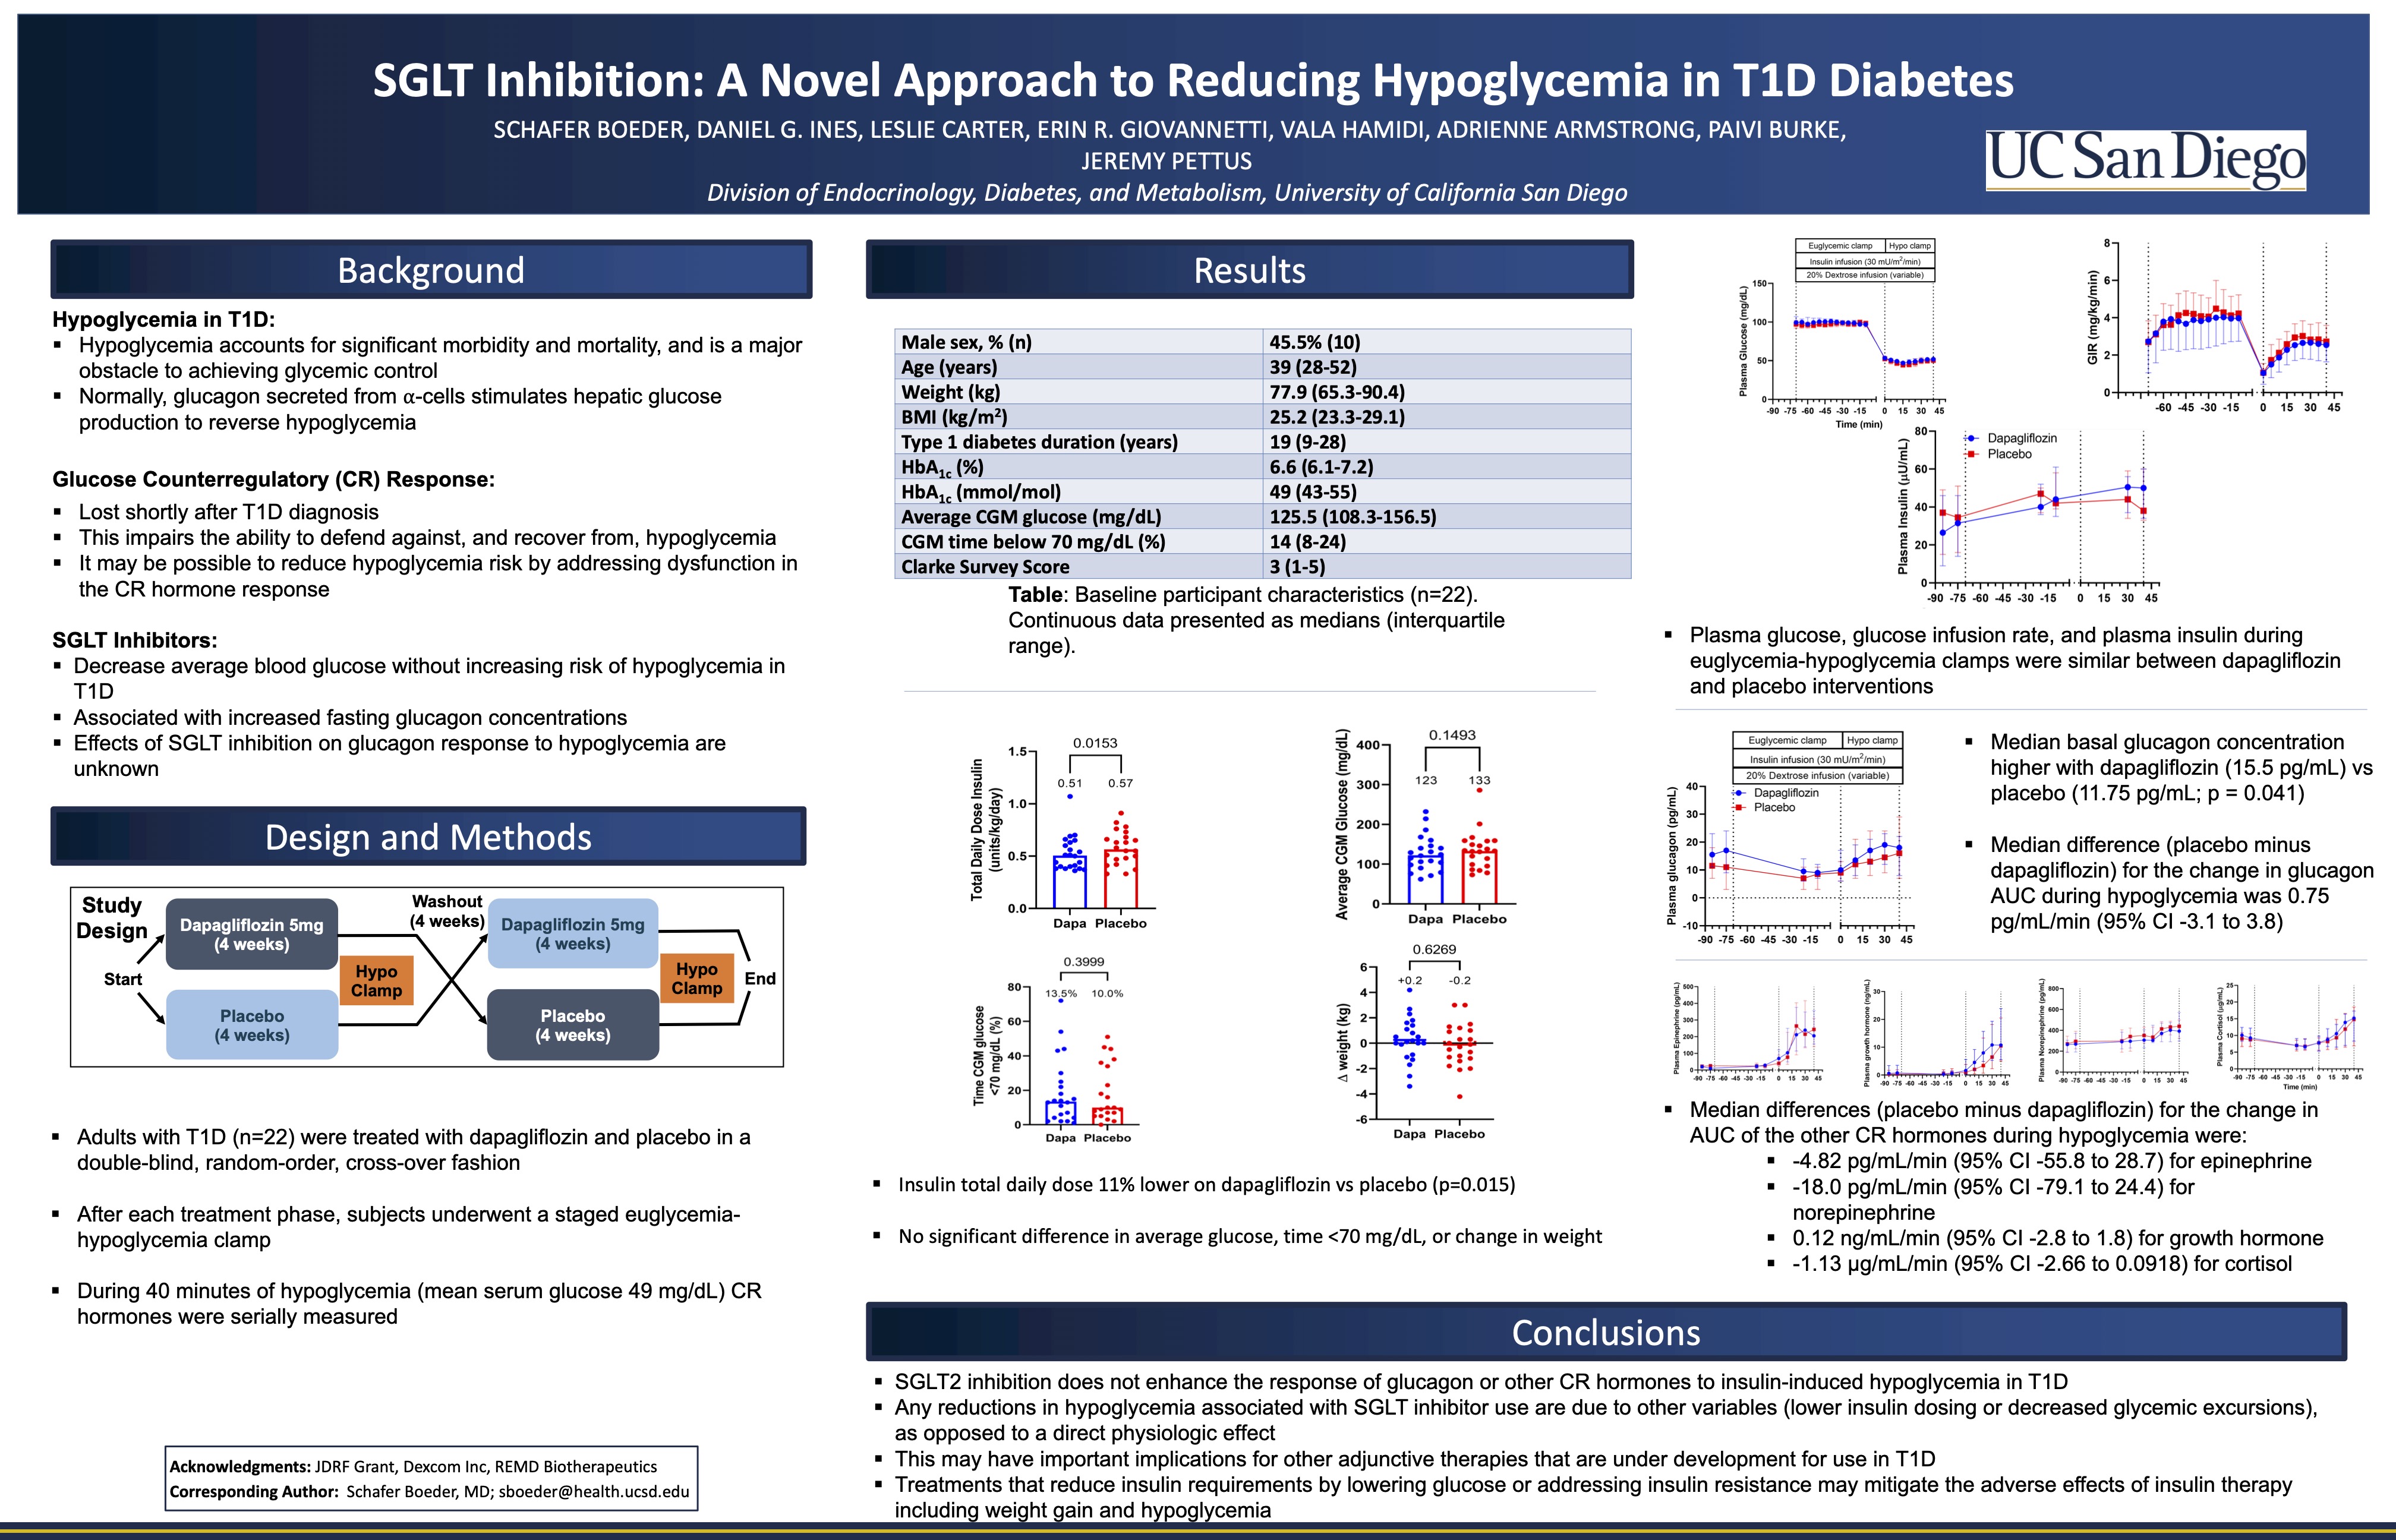 Showcase Image for  SGLT Inhibition: A Novel Approach to Reducing Hypoglycemia in T1D Diabetes